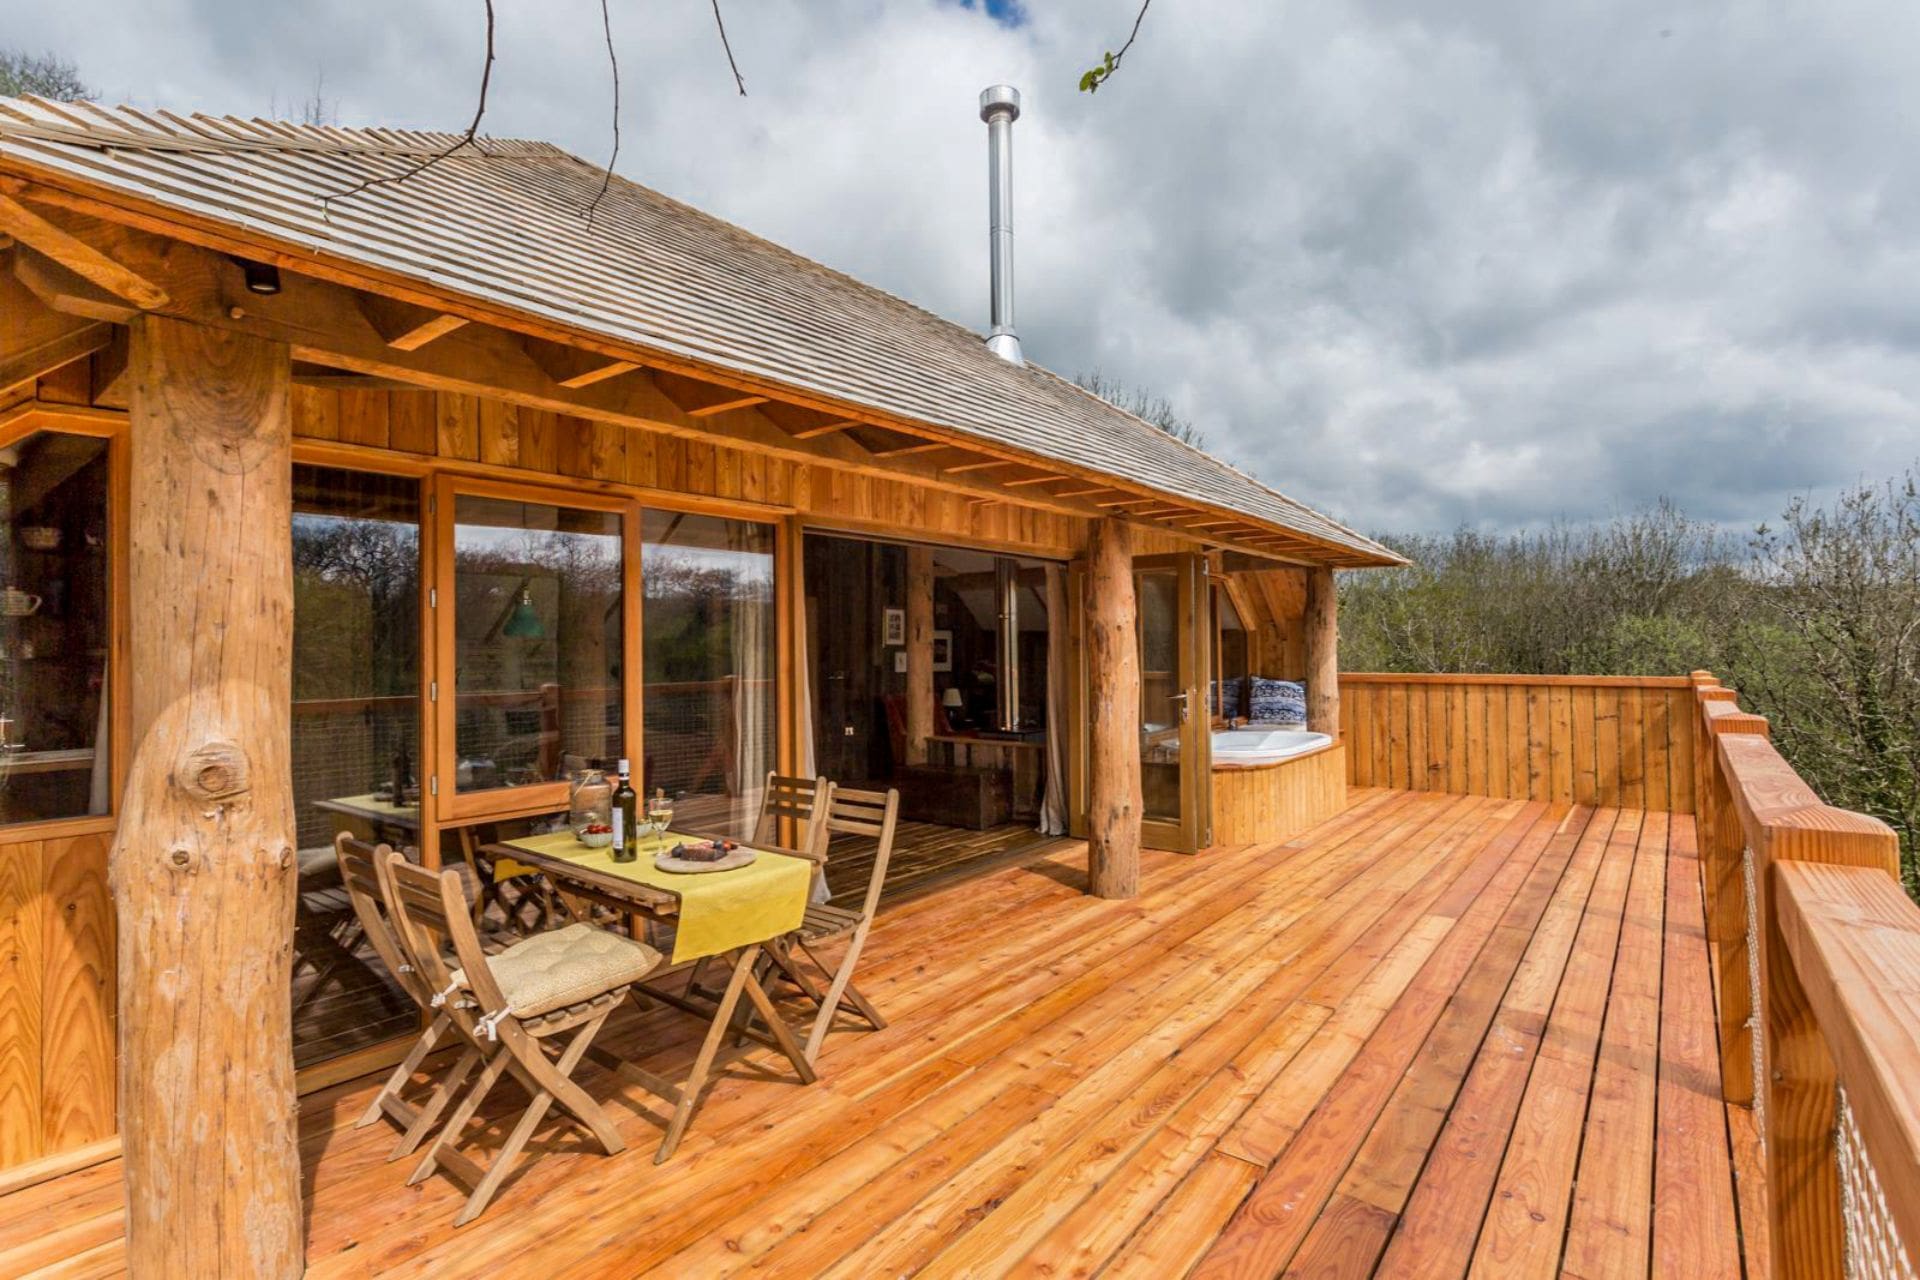 large-balcony-of-treehouse-with-a-dining-table-and-chairs-and-hot-tub-wolf-wood-treehouses-okehampton-devon-treehouse-holidays-uk-with-hot-tub